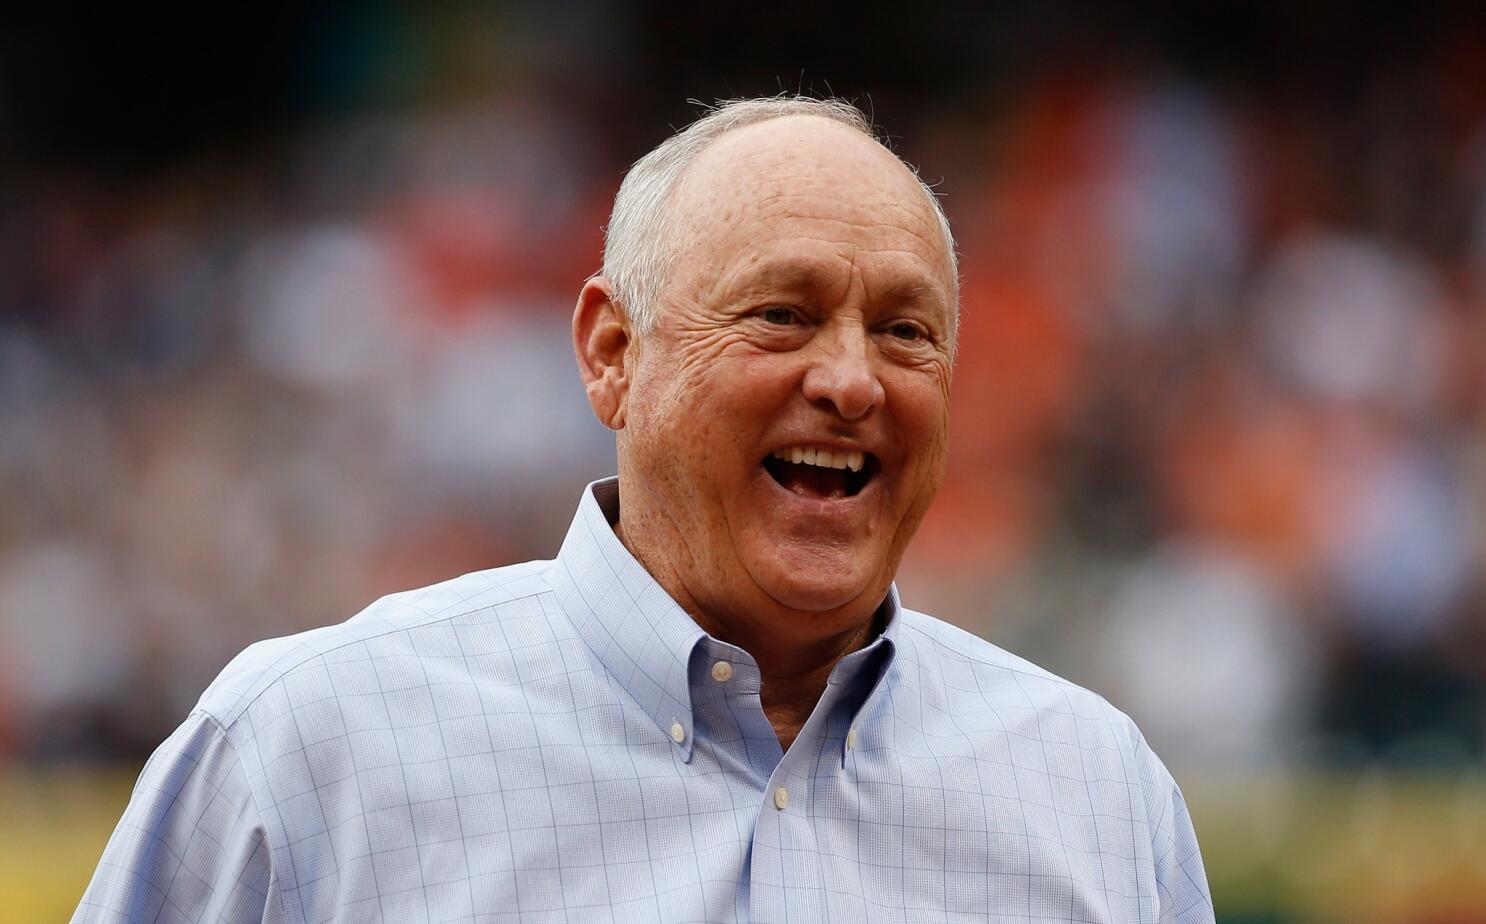 Nolan Ryan Returns to World Series After 41 Years - The New York Times